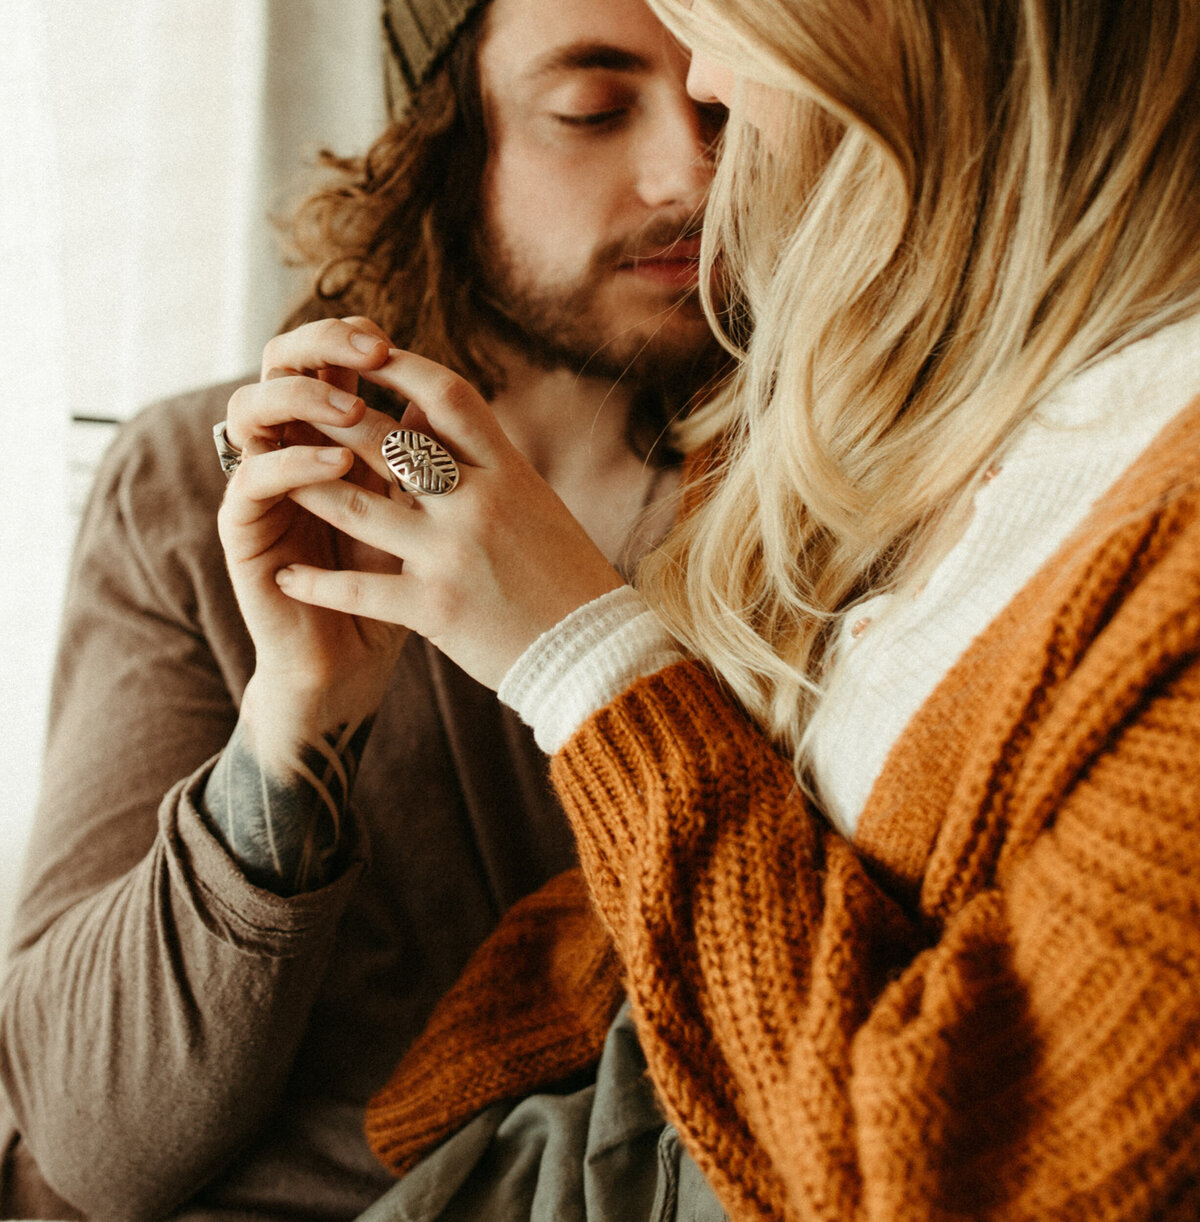 st-george-southern-utah-in-home-engagement-session-photoshoot-cozy-sweater-winter12